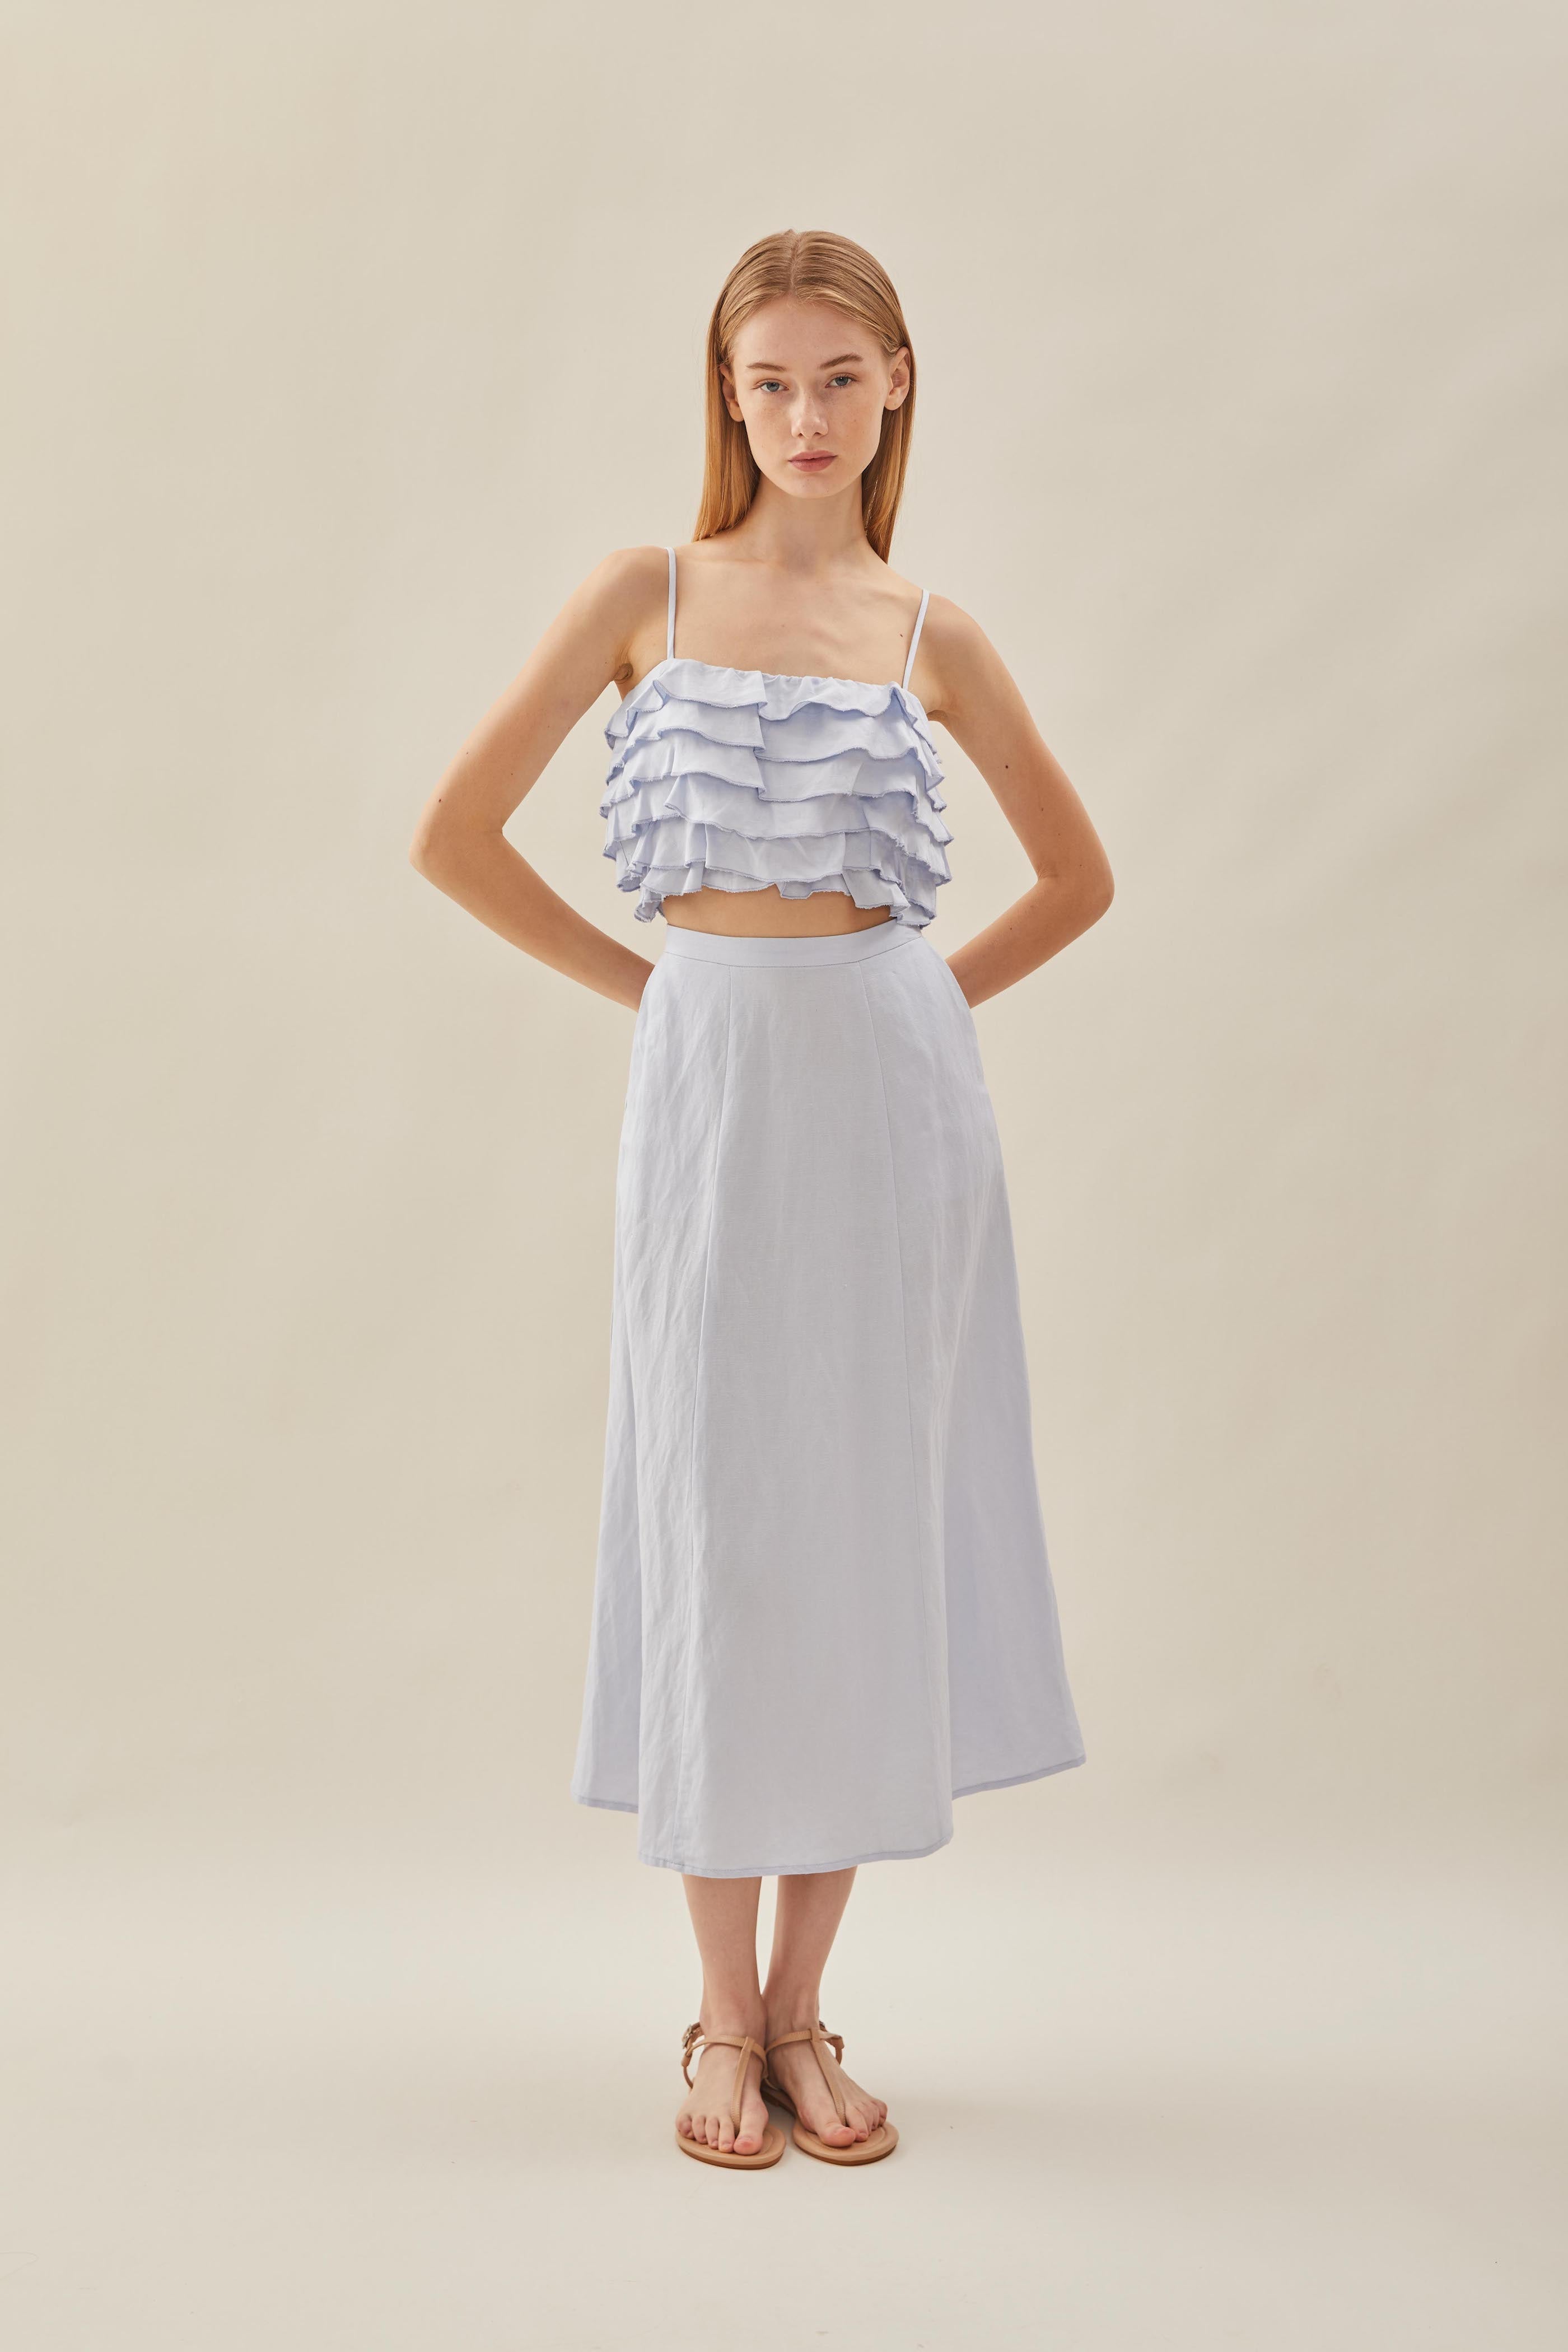 Tiered Frill Top in Mist Blue